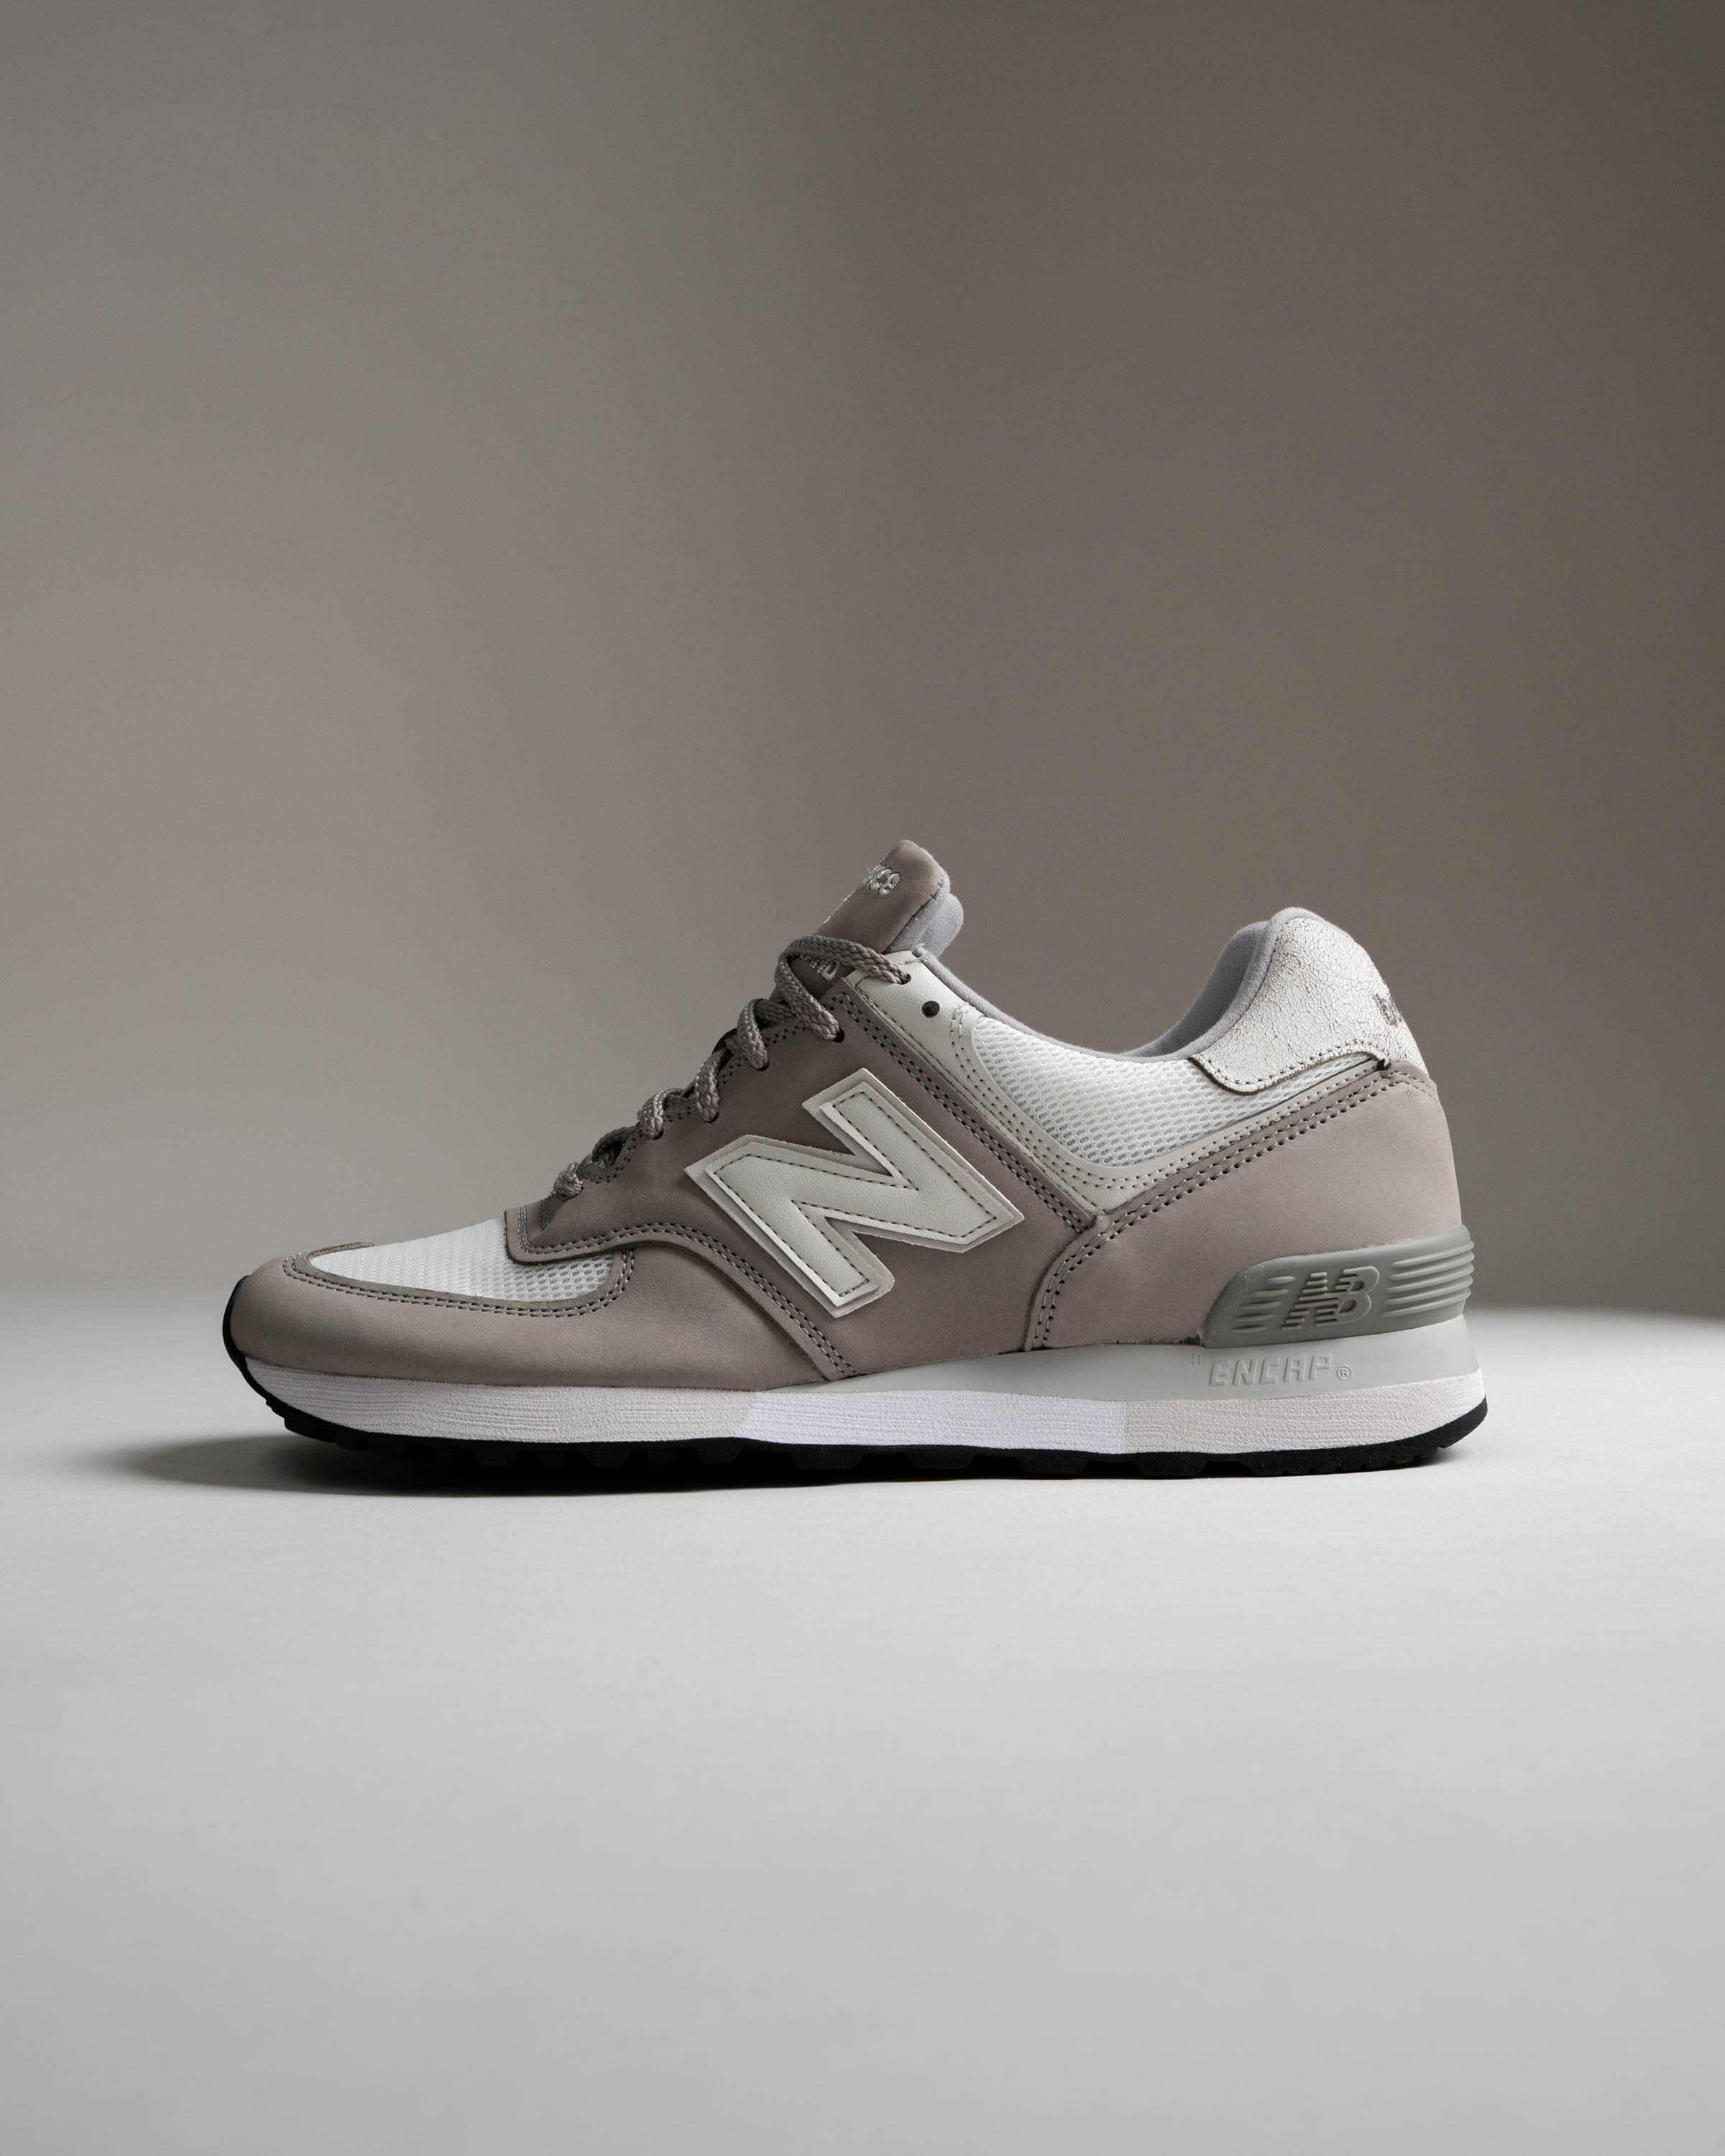 New Balance OU 576 FLB - Made in England